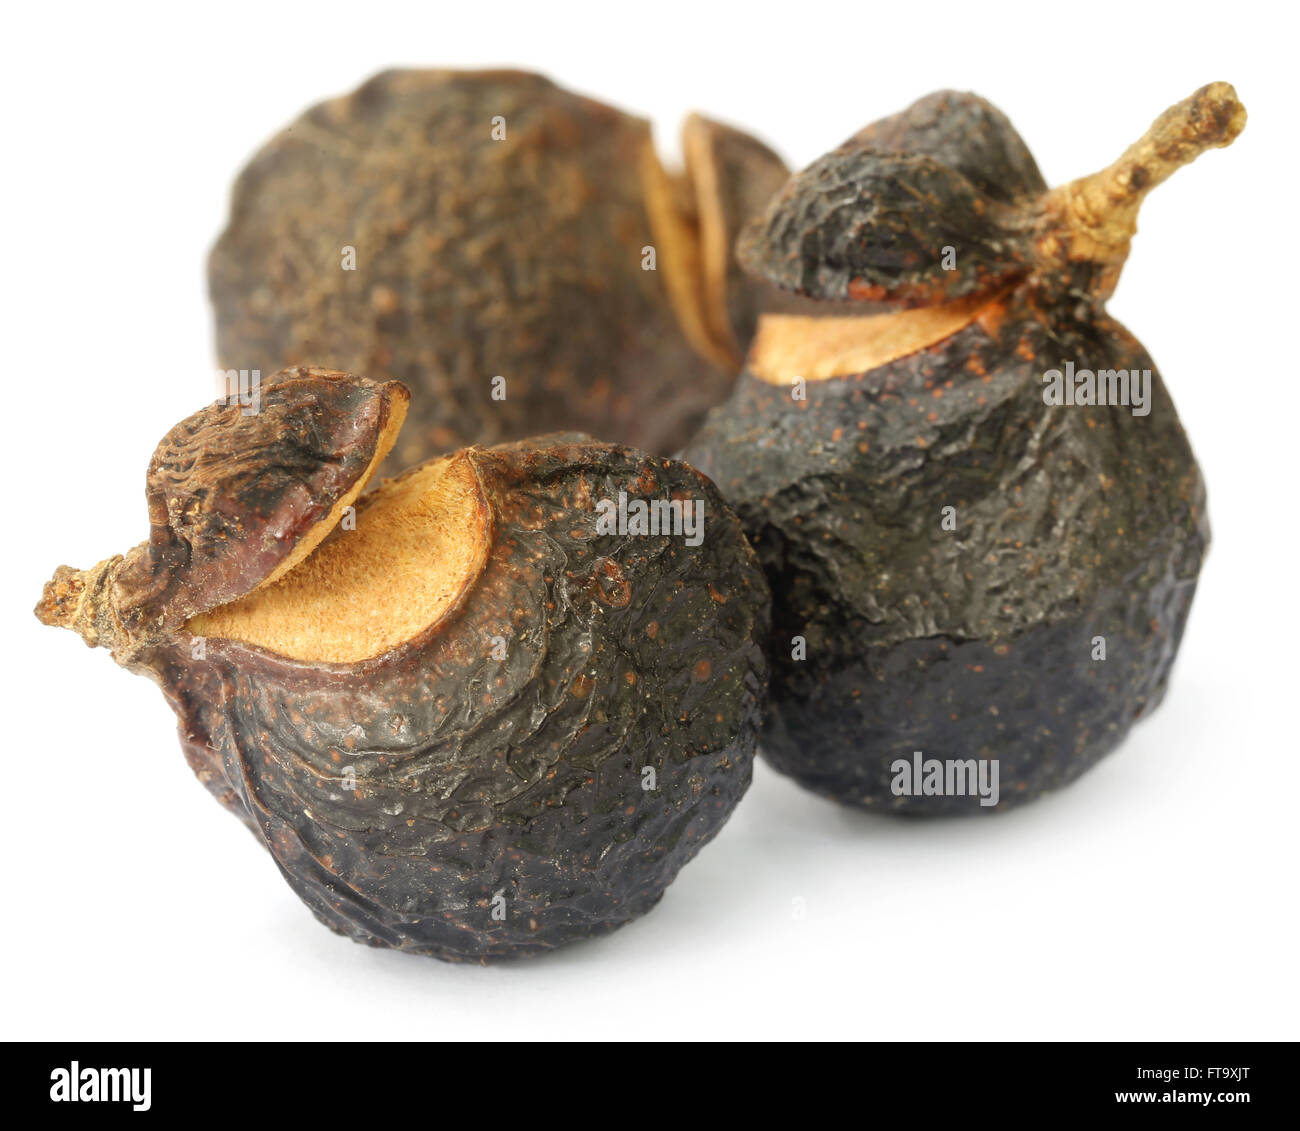 Soapnuts or Soapberries used as natural surfactant over white background Stock Photo